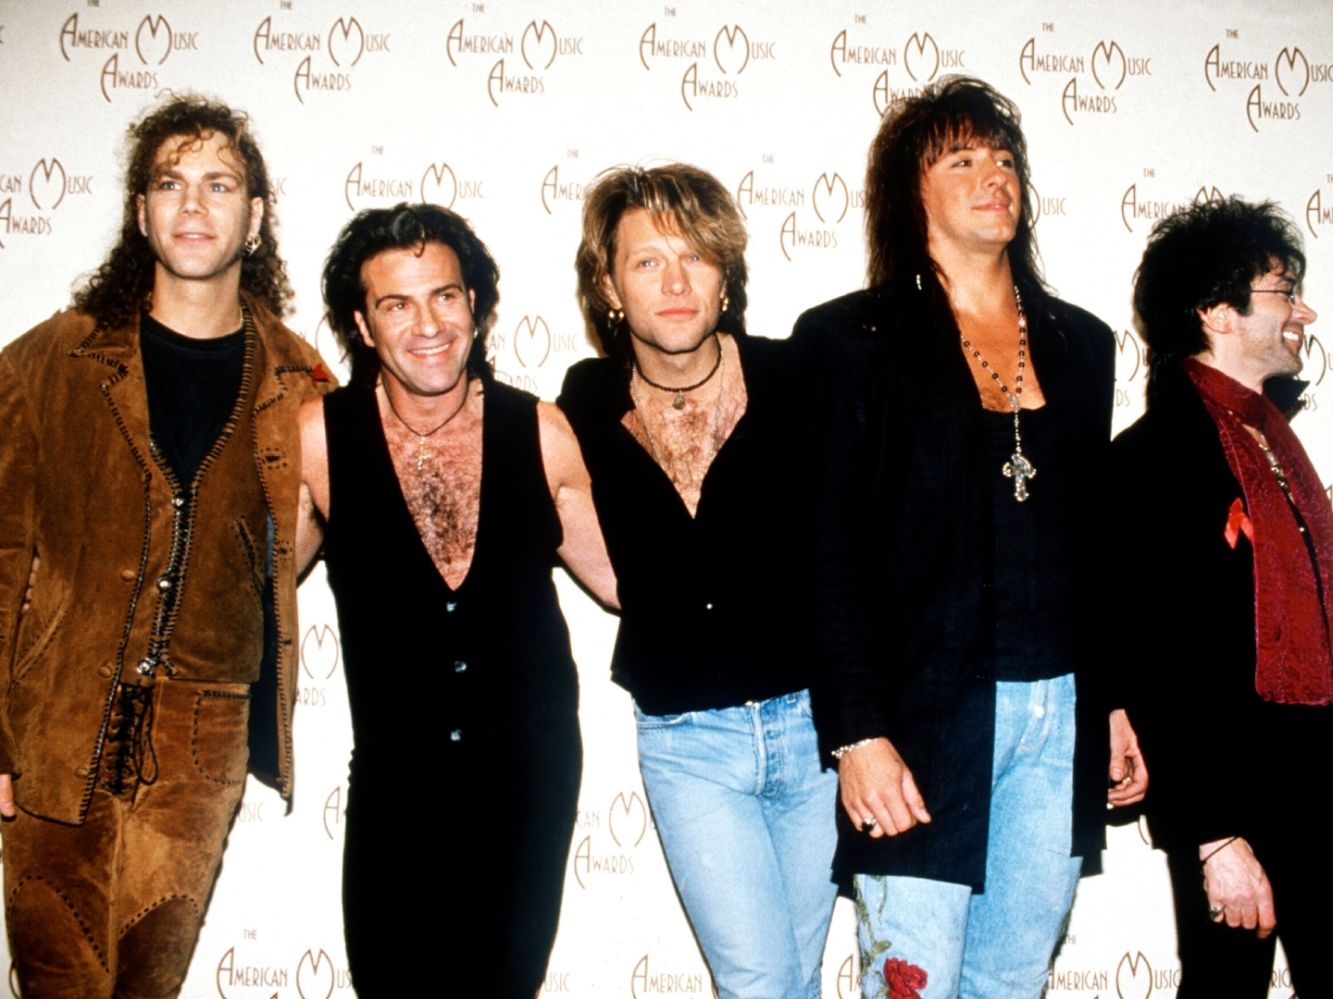 <p>       If you purchase an independently reviewed product or service through a link on our website, SheKnows may receive an affiliate commission.    </p>  <p>With four decades under their belt, Bon Jovi are still at the top of their game. In support of the 40th anniversary of their debut album, the band of brothers from New Jersey have readied themselves for a big, big year.  </p> <p>First, they released a new single in 2024, the aptly named “Legendary” from their upcoming 16th studio album, Forever. Then there’s the limited edition ruby-colored vinyl LP for the 40th anniversary of the Bon Jovi album, ruby being the traditional gift for such an occasion. And to cap it all off, a four-part docuseries on Hulu, Thank You, Goodnight: The Bon Jovi Story.  </p> <p>With a sound and look that defined the 80s, Bon Jovi ruled radio and MTV with a remarkable string of hits like “Livin On A Prayer,” “You Give Love A Bad Name,” and “Wanted Dead Or Alive.” They’re internationally known for their songs that bridged the gap between hard rock and pop, epic videos, dynamic live shows, and all that hair. While topping the charts and performing to over 100,000,000 fans, they picked up multiple awards from The Grammys, MTV, CMT, Billboard, and American Music Awards.</p> <p>Let’s take a trip down memory lane to celebrate the 40th anniversary of legendary rock band Bon Jovi, who’ve “seen a million faces, and rocked ‘em all.”</p> <p>Here’s our chronological list of 21 of Bon Jovi’s most iconic moments. A primer of what it takes to continue to make a mark, four decades on. Aspiring rockers, hair models, and philanthropists take note.</p>